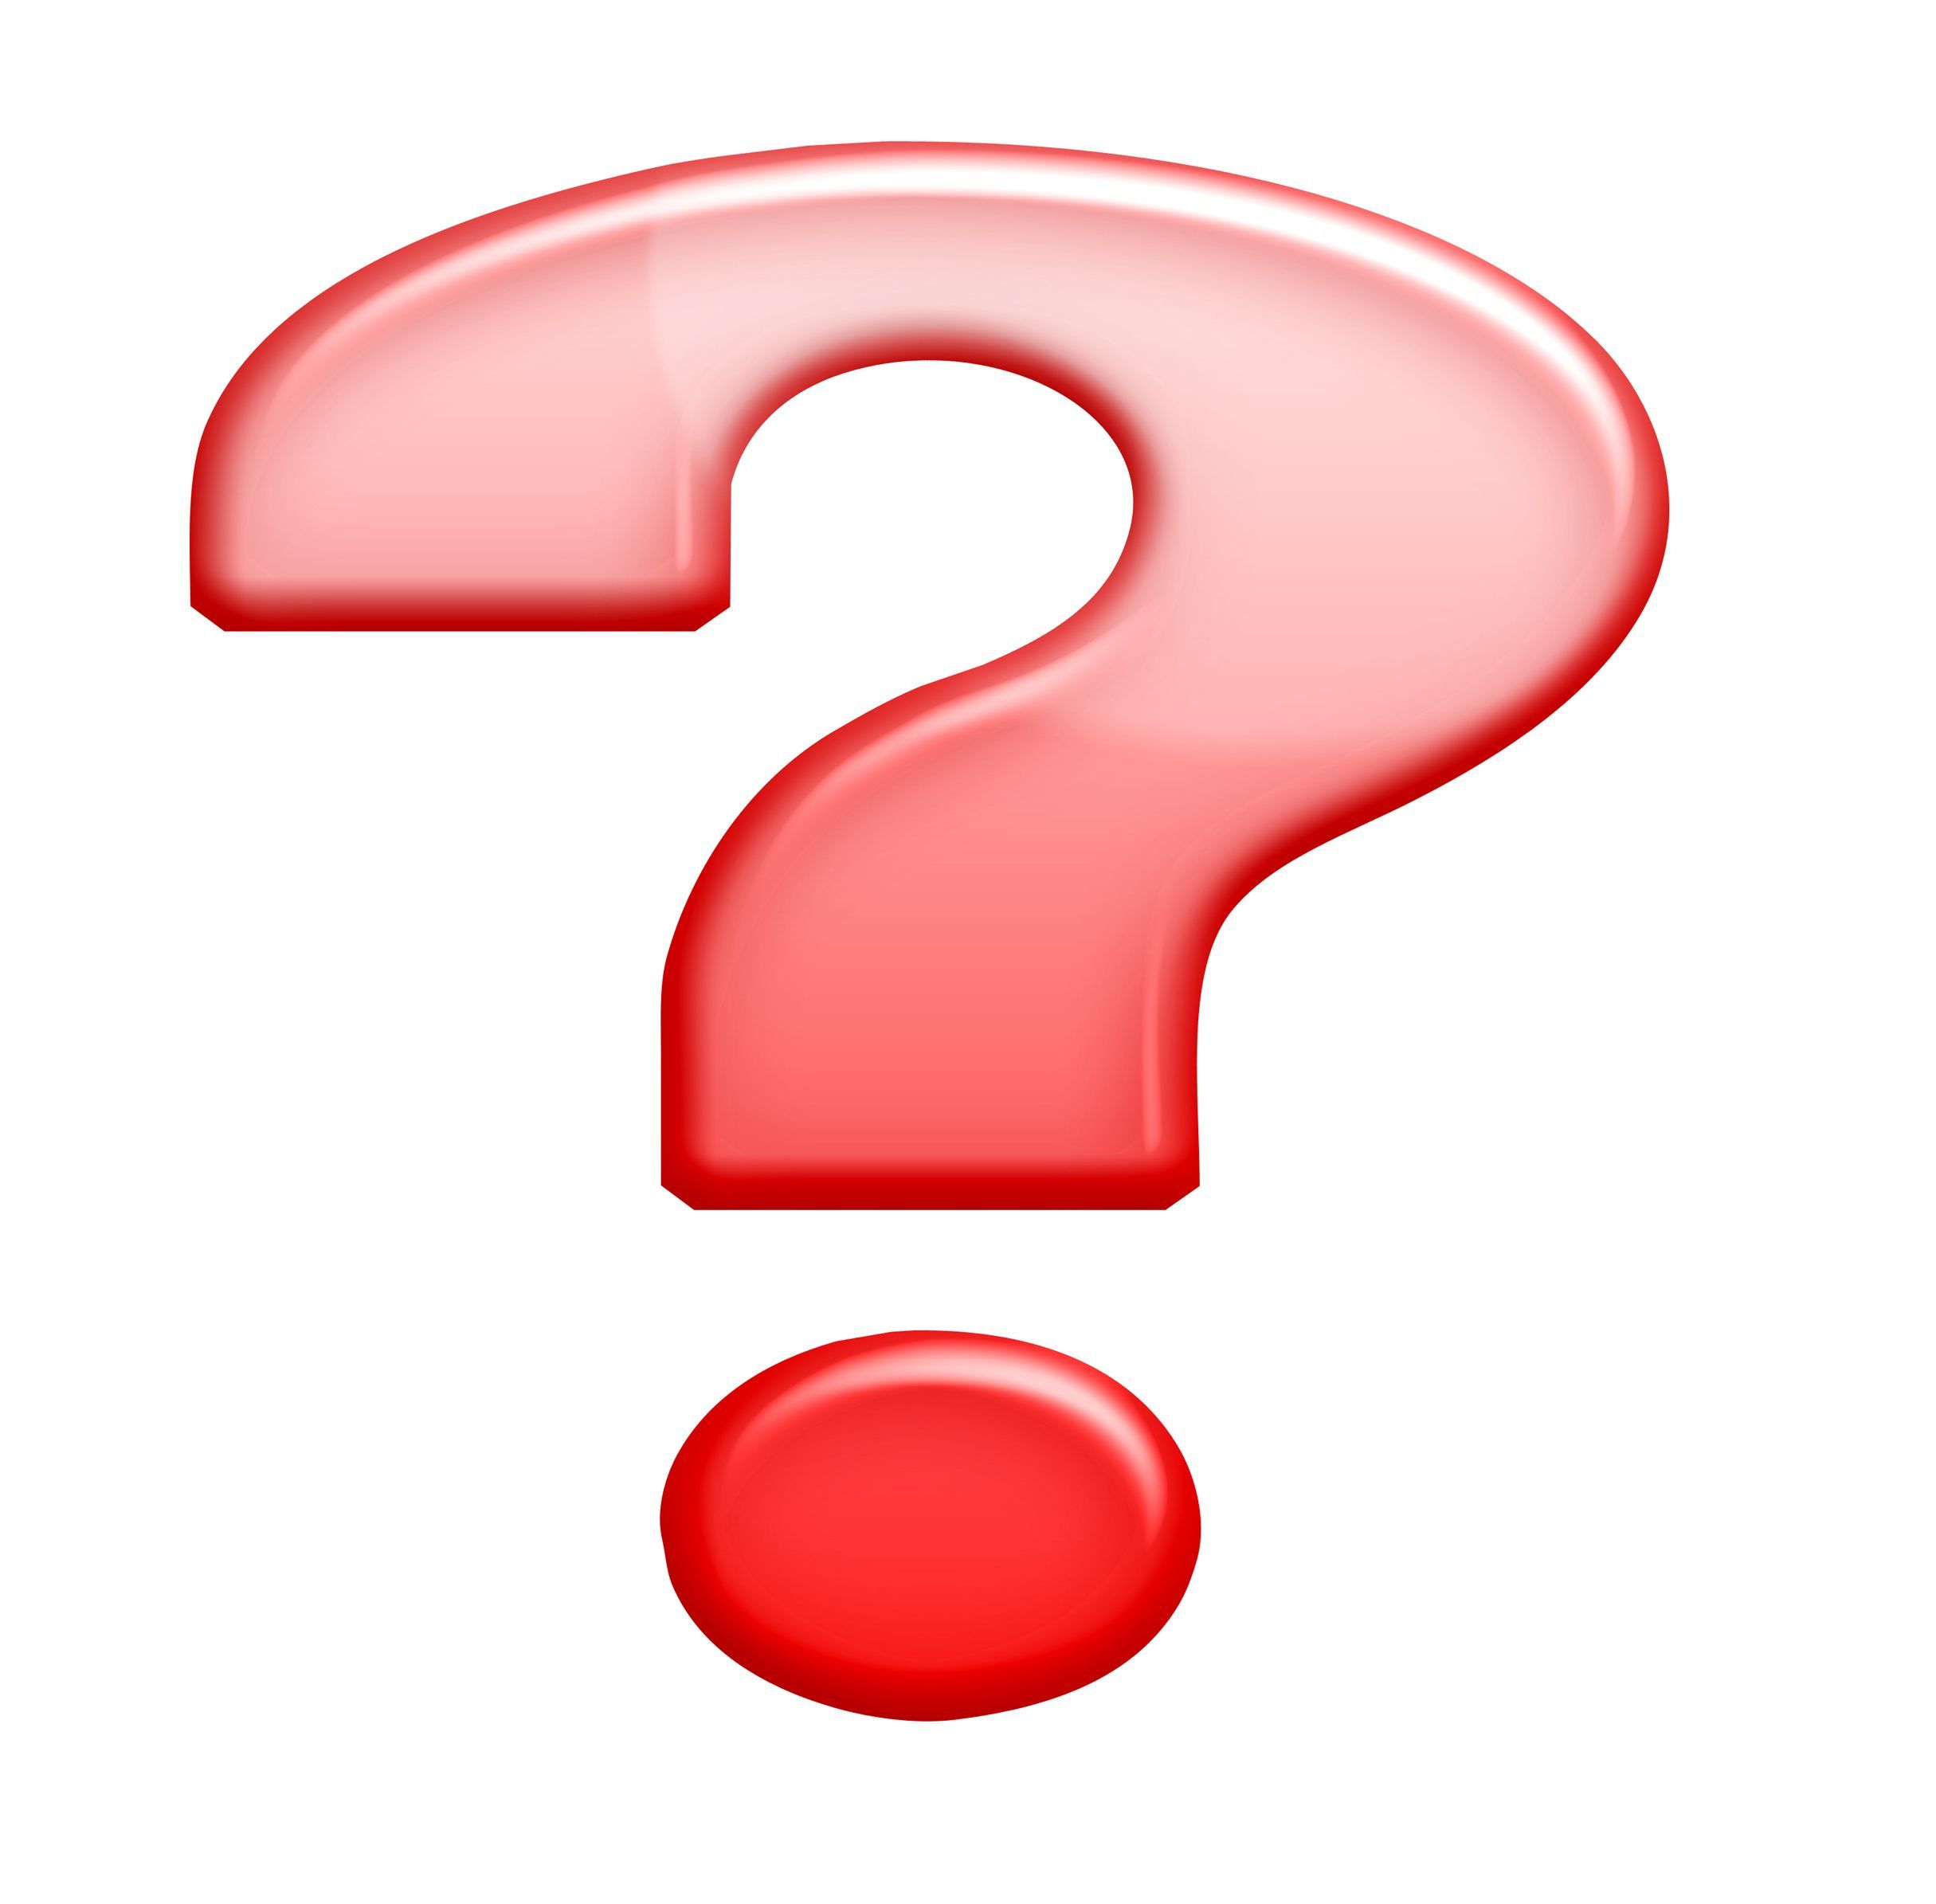 Picture Of Question Marks - ClipArt Best